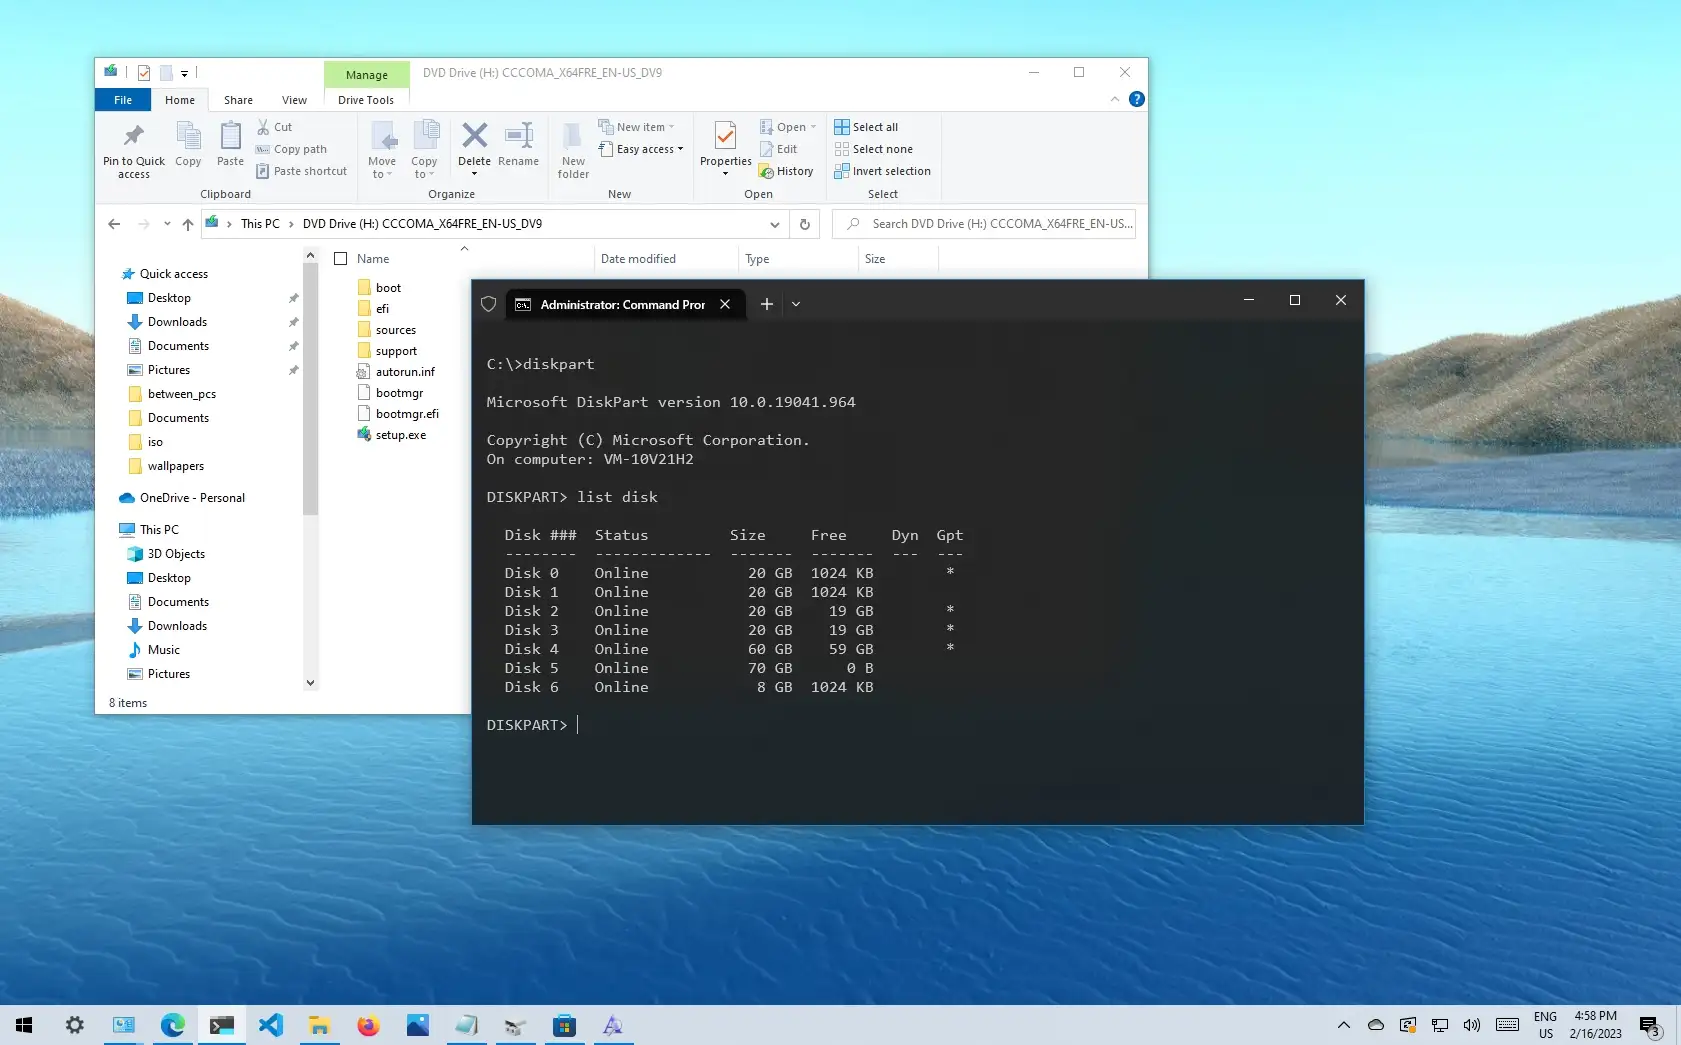 manifestation Stol sennep How to create Windows 10 bootable USB with Command Prompt - Pureinfotech